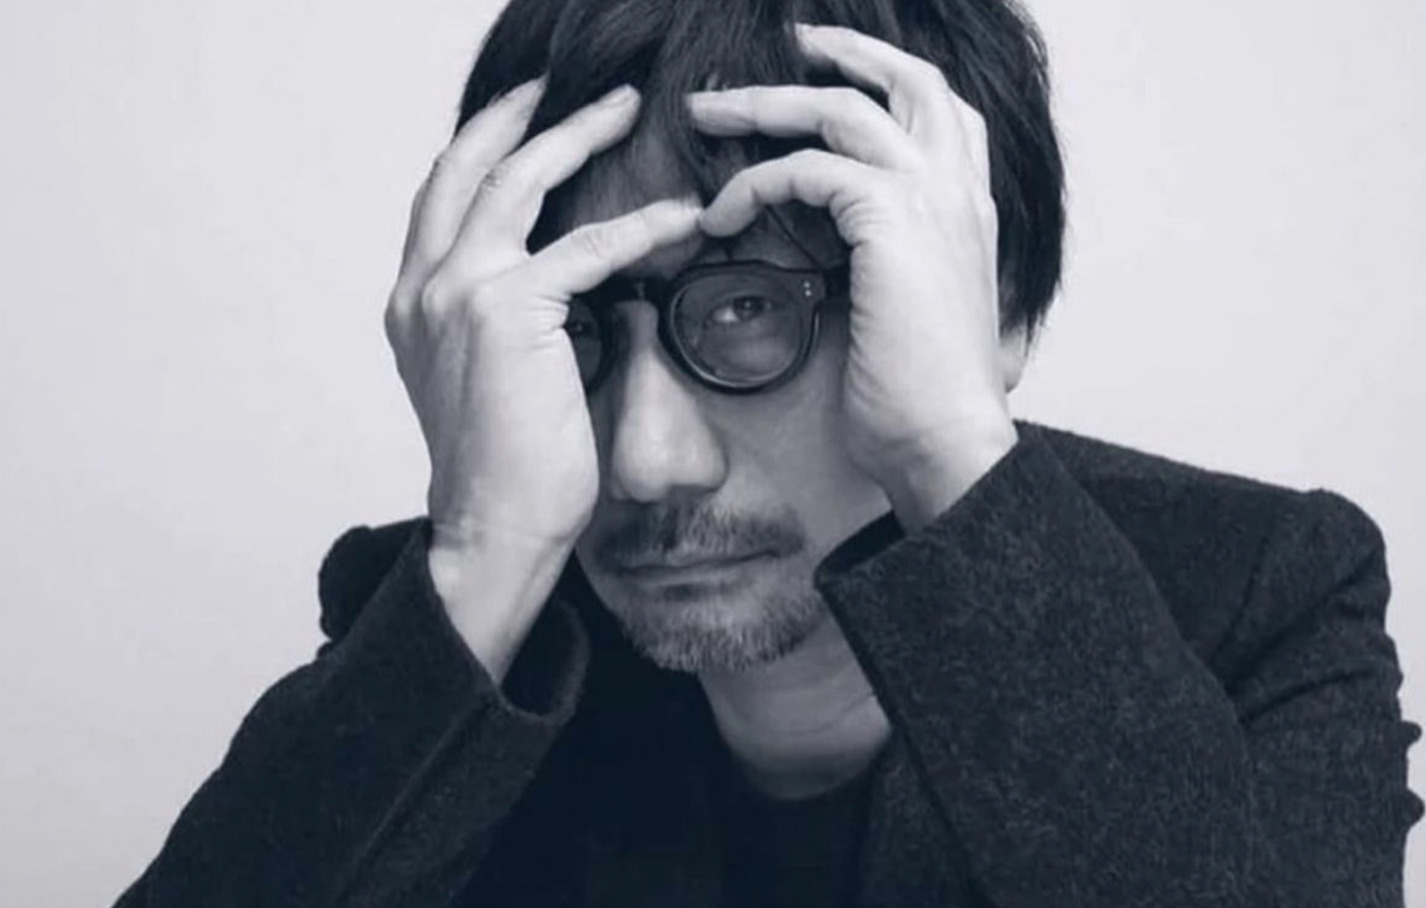 News - Hideo Kojima - Connecting Worlds starring Hideo Kojima to premiere  at Tribecafilm, followed by Q&A with Hideo Kojima, Page 3